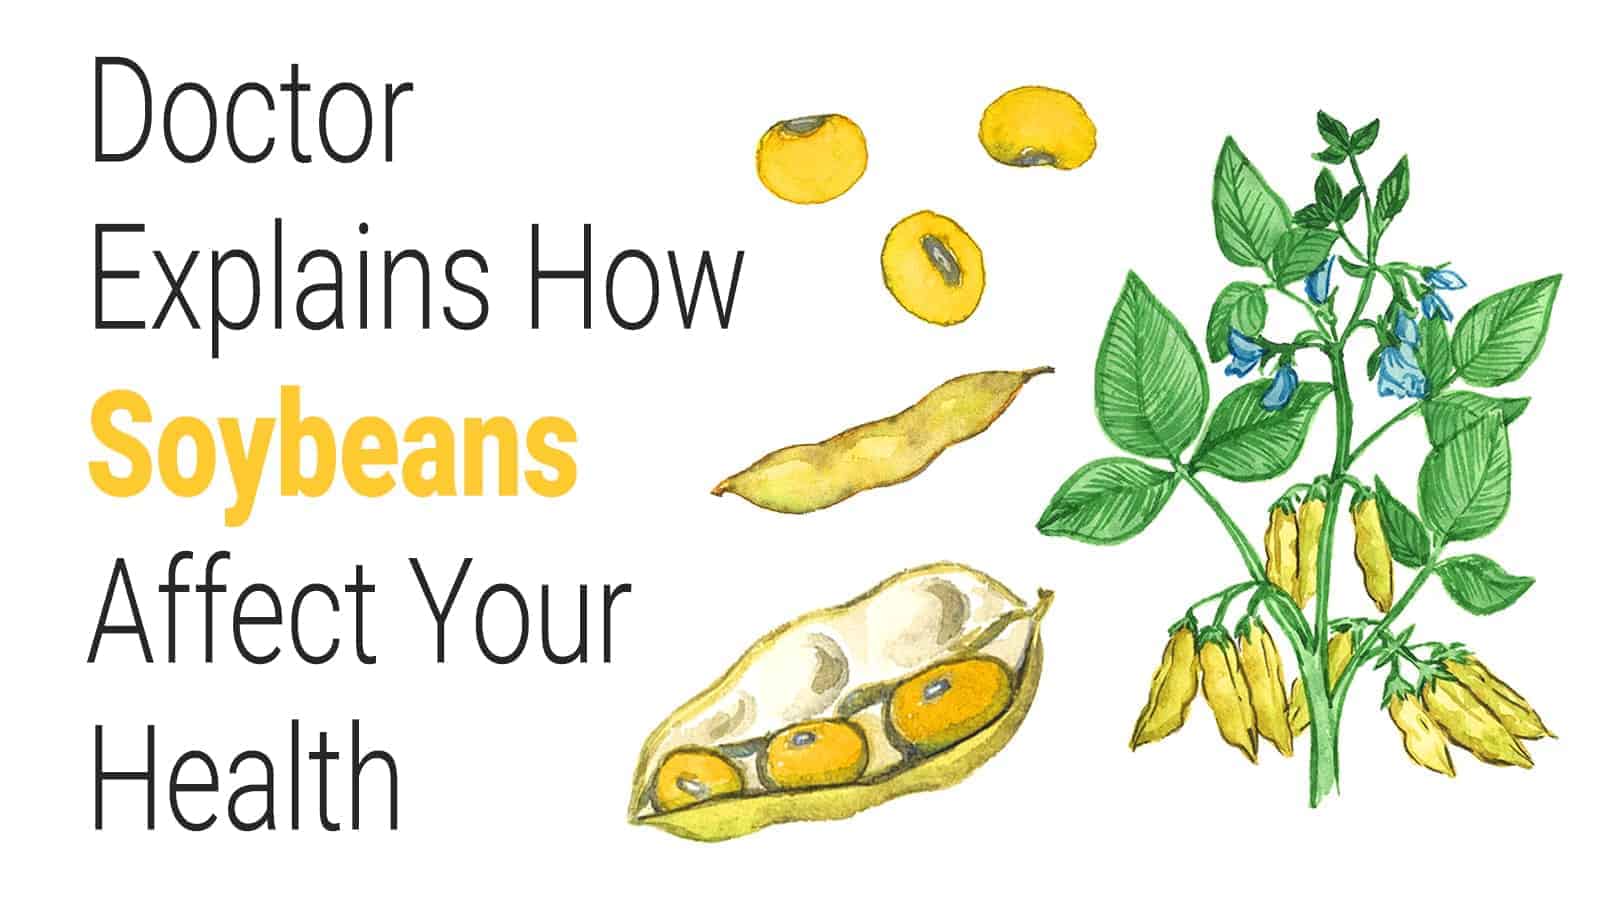 Doctor Explains How Soybeans Affect Your Health